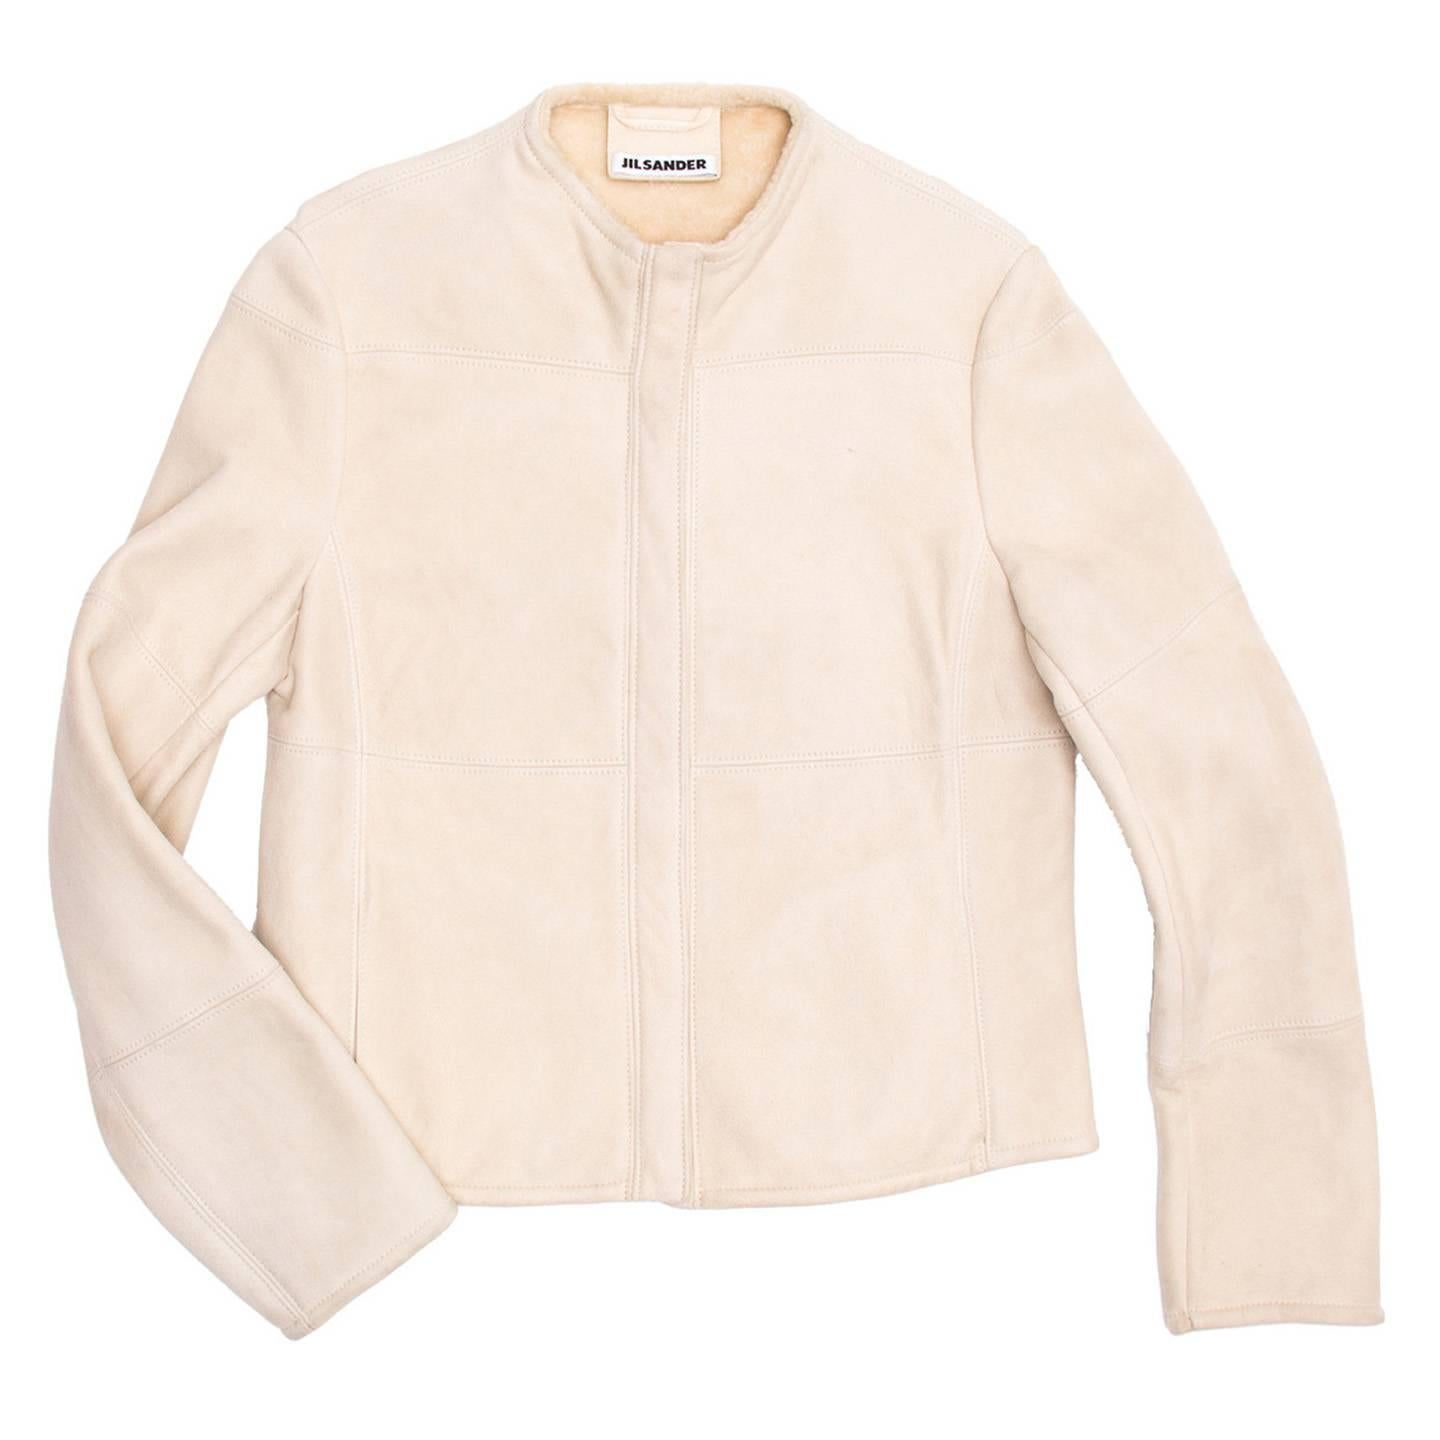 Cream shearling collarless racer style jacket with  tone-one tone hidden zipper at center front.

Size  40 French sizing

Condition  Excellent: worn a few times